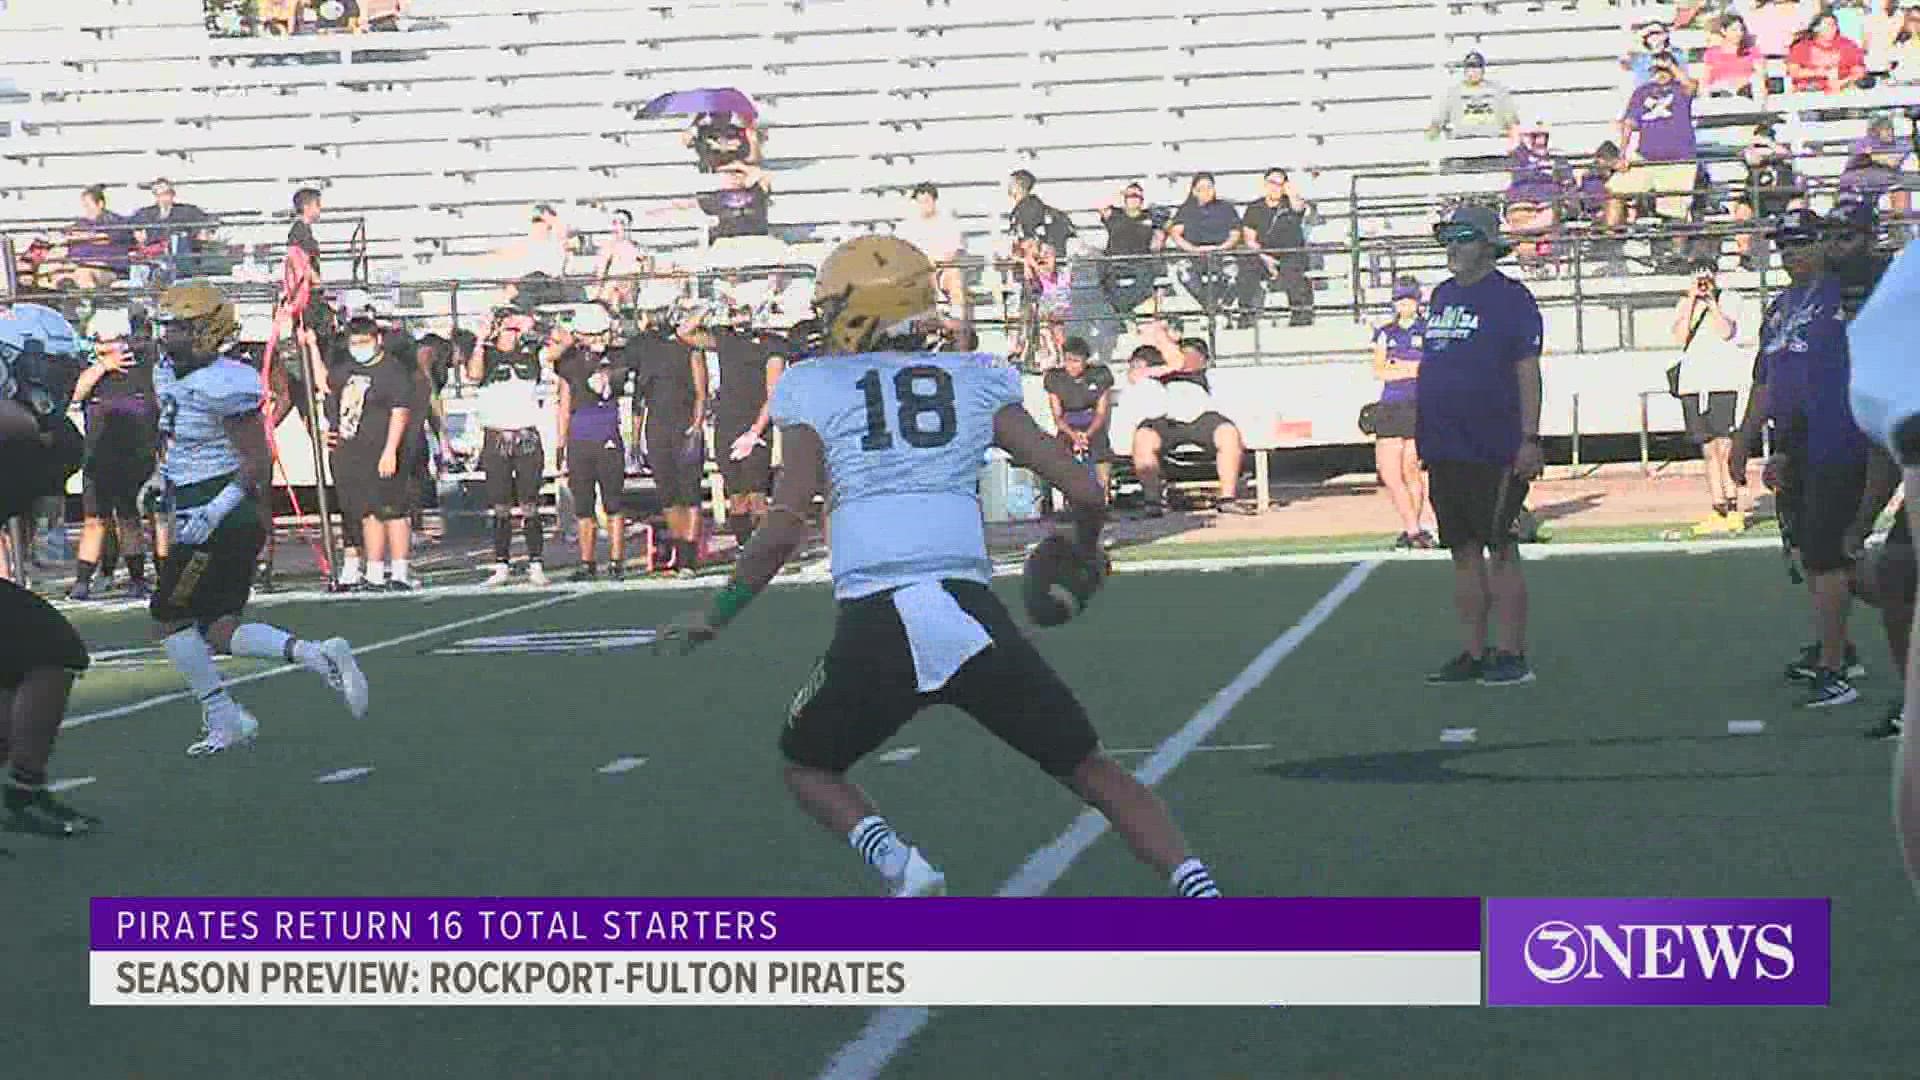 The Pirates return 16 total starting positions including sophomore QB Ace Seibert, son of Head Coach Jay Seibert.